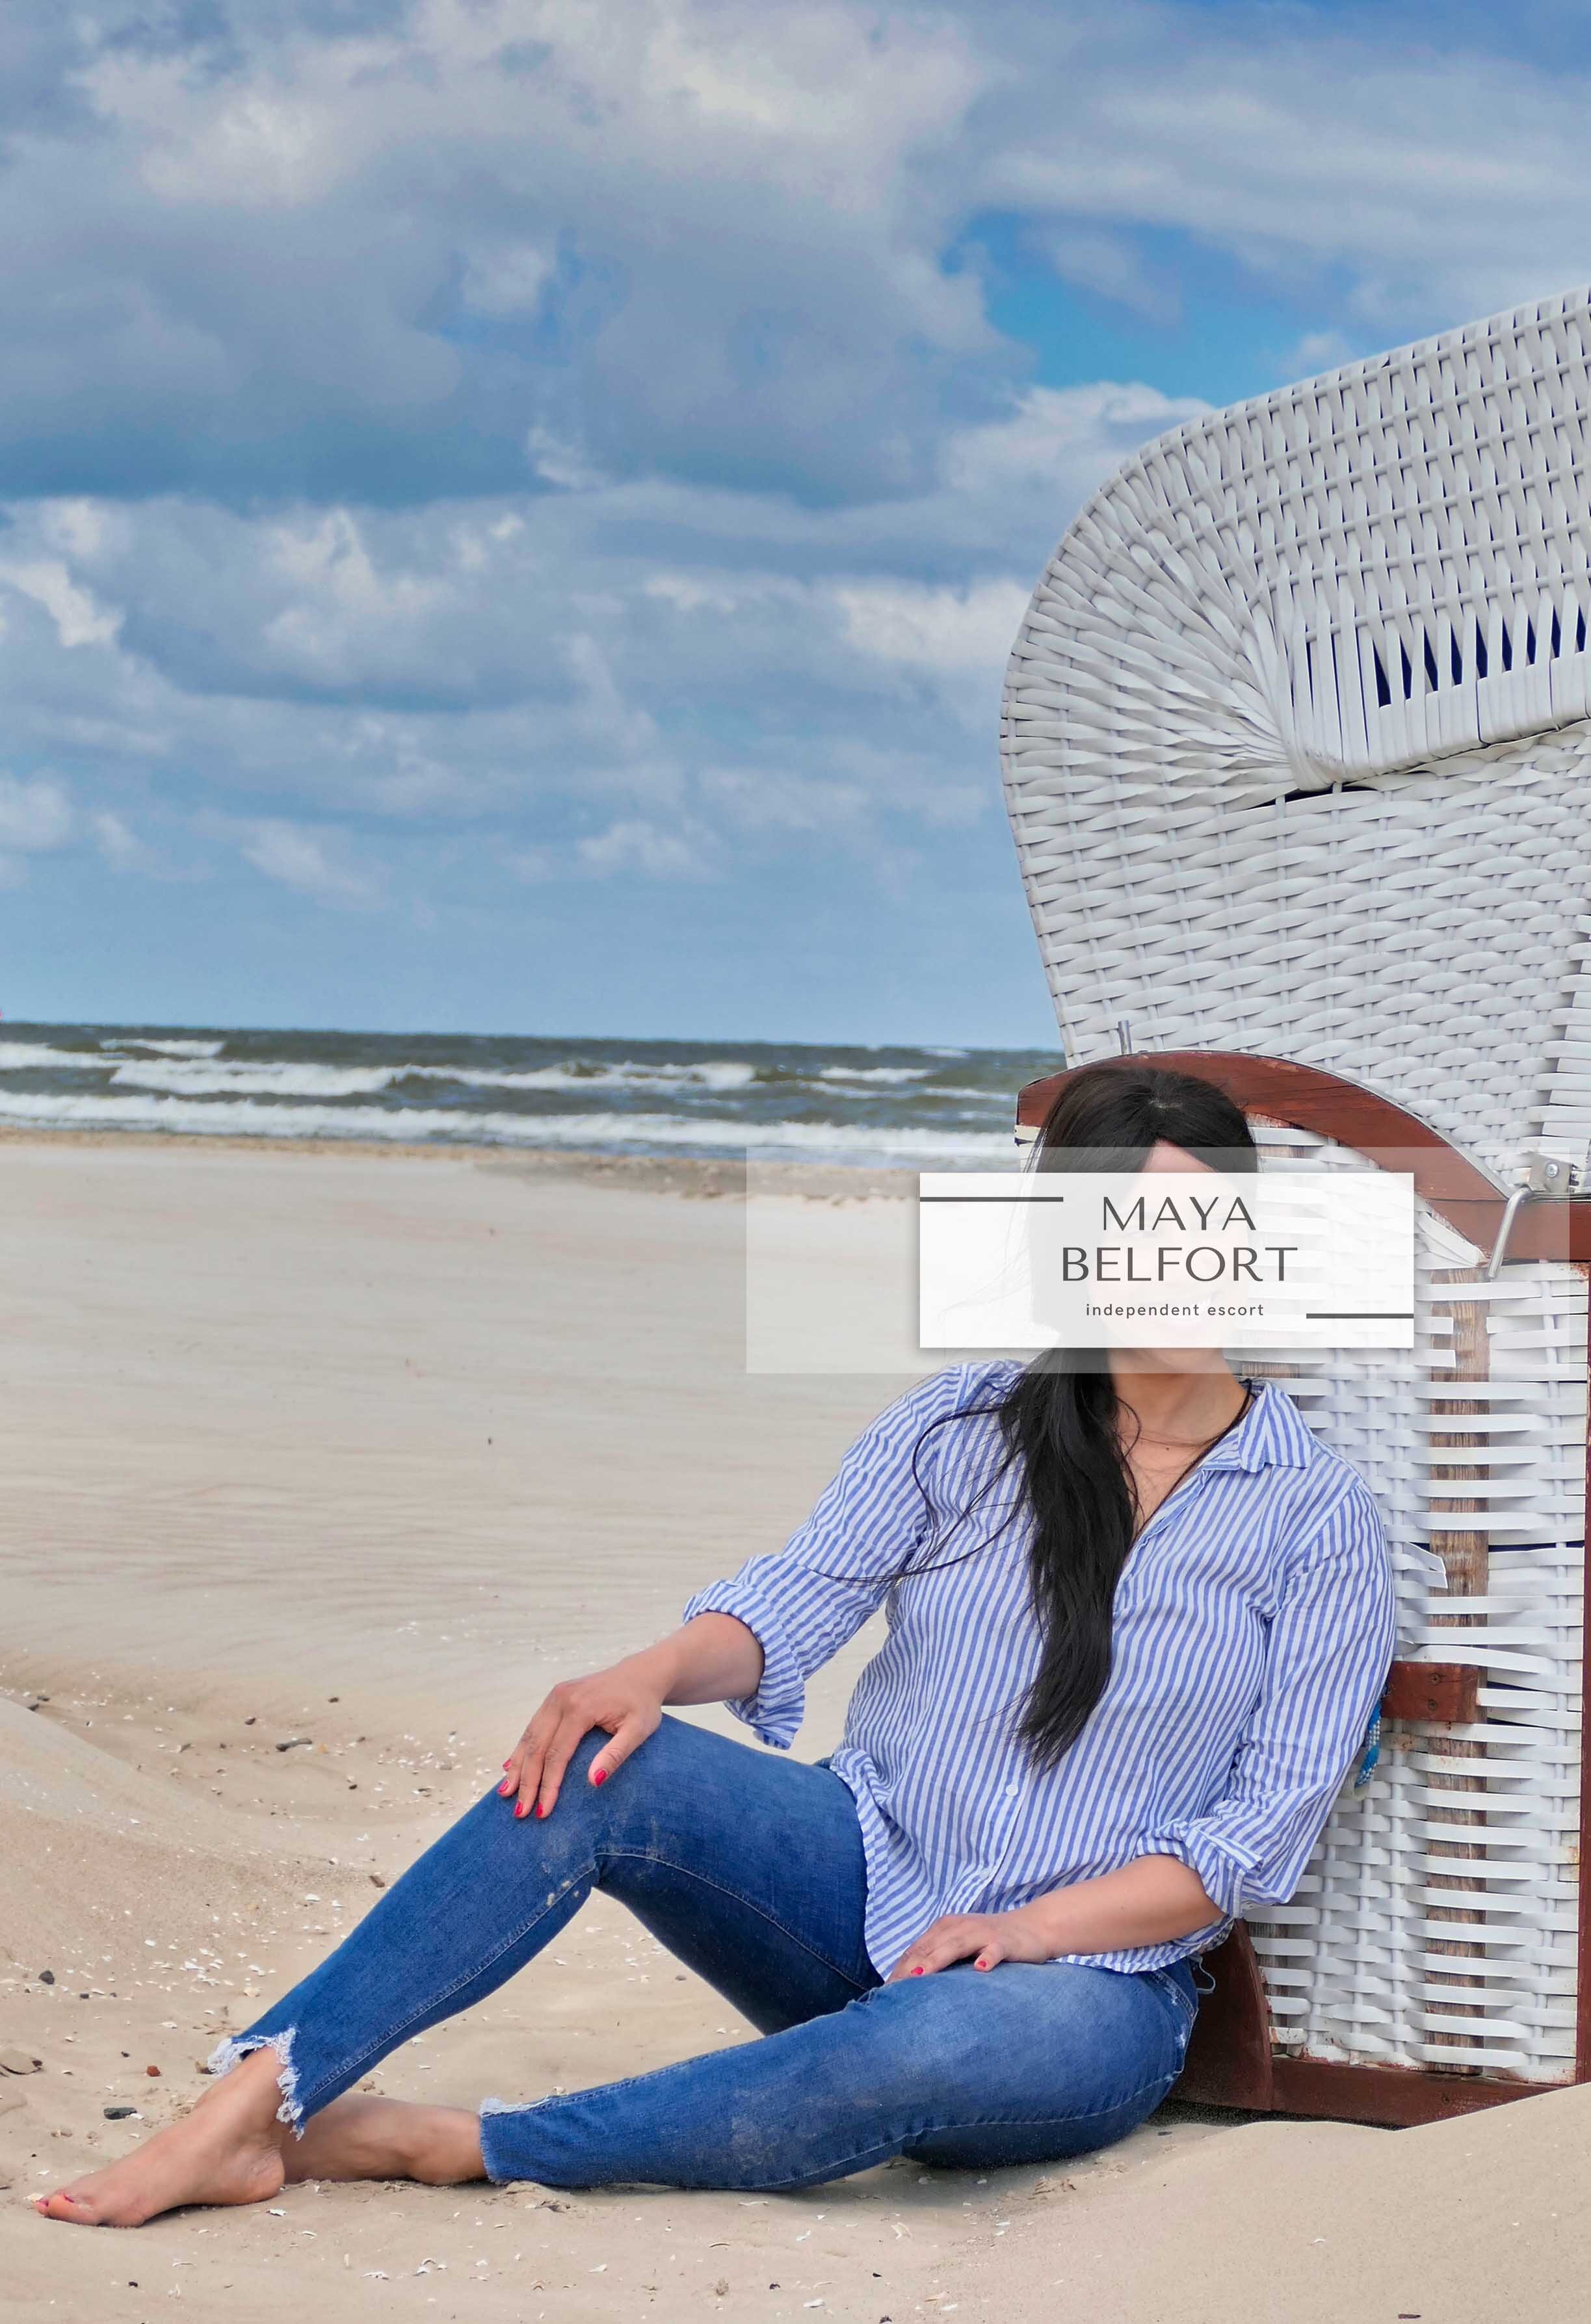 escort dates on Sylt in nice hotels and good restaurants